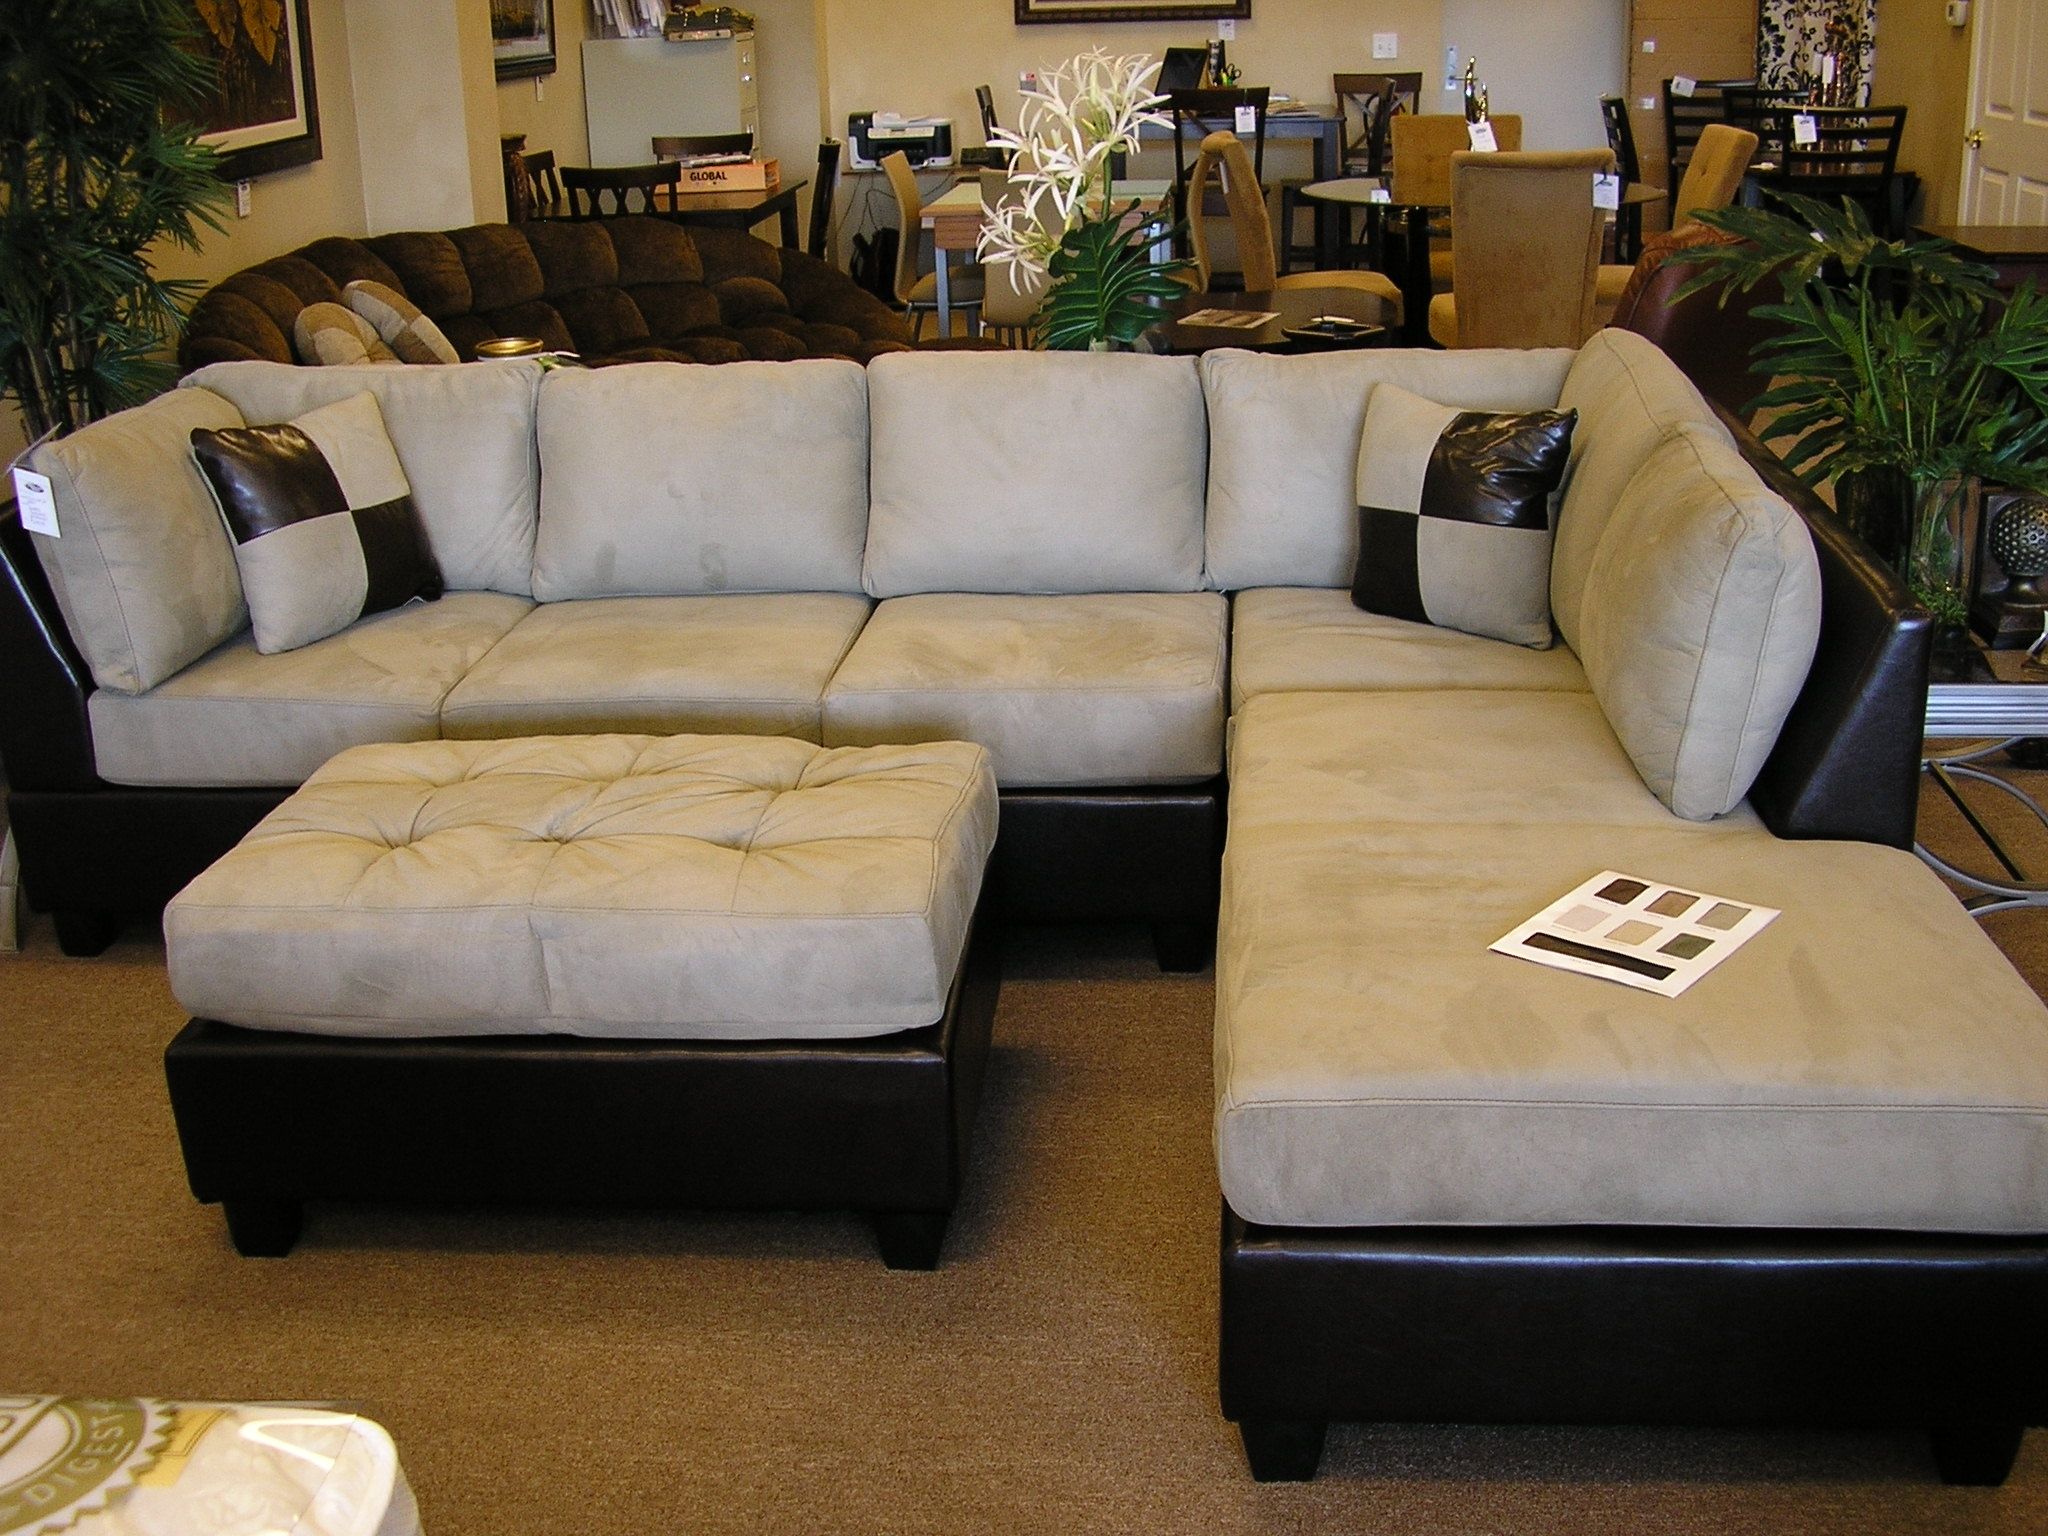 New Sectional Sofa With Chaise And Ottoman 74 On Stretch Slipcovers In Sectional Sofas With Chaise And Ottoman (View 4 of 15)